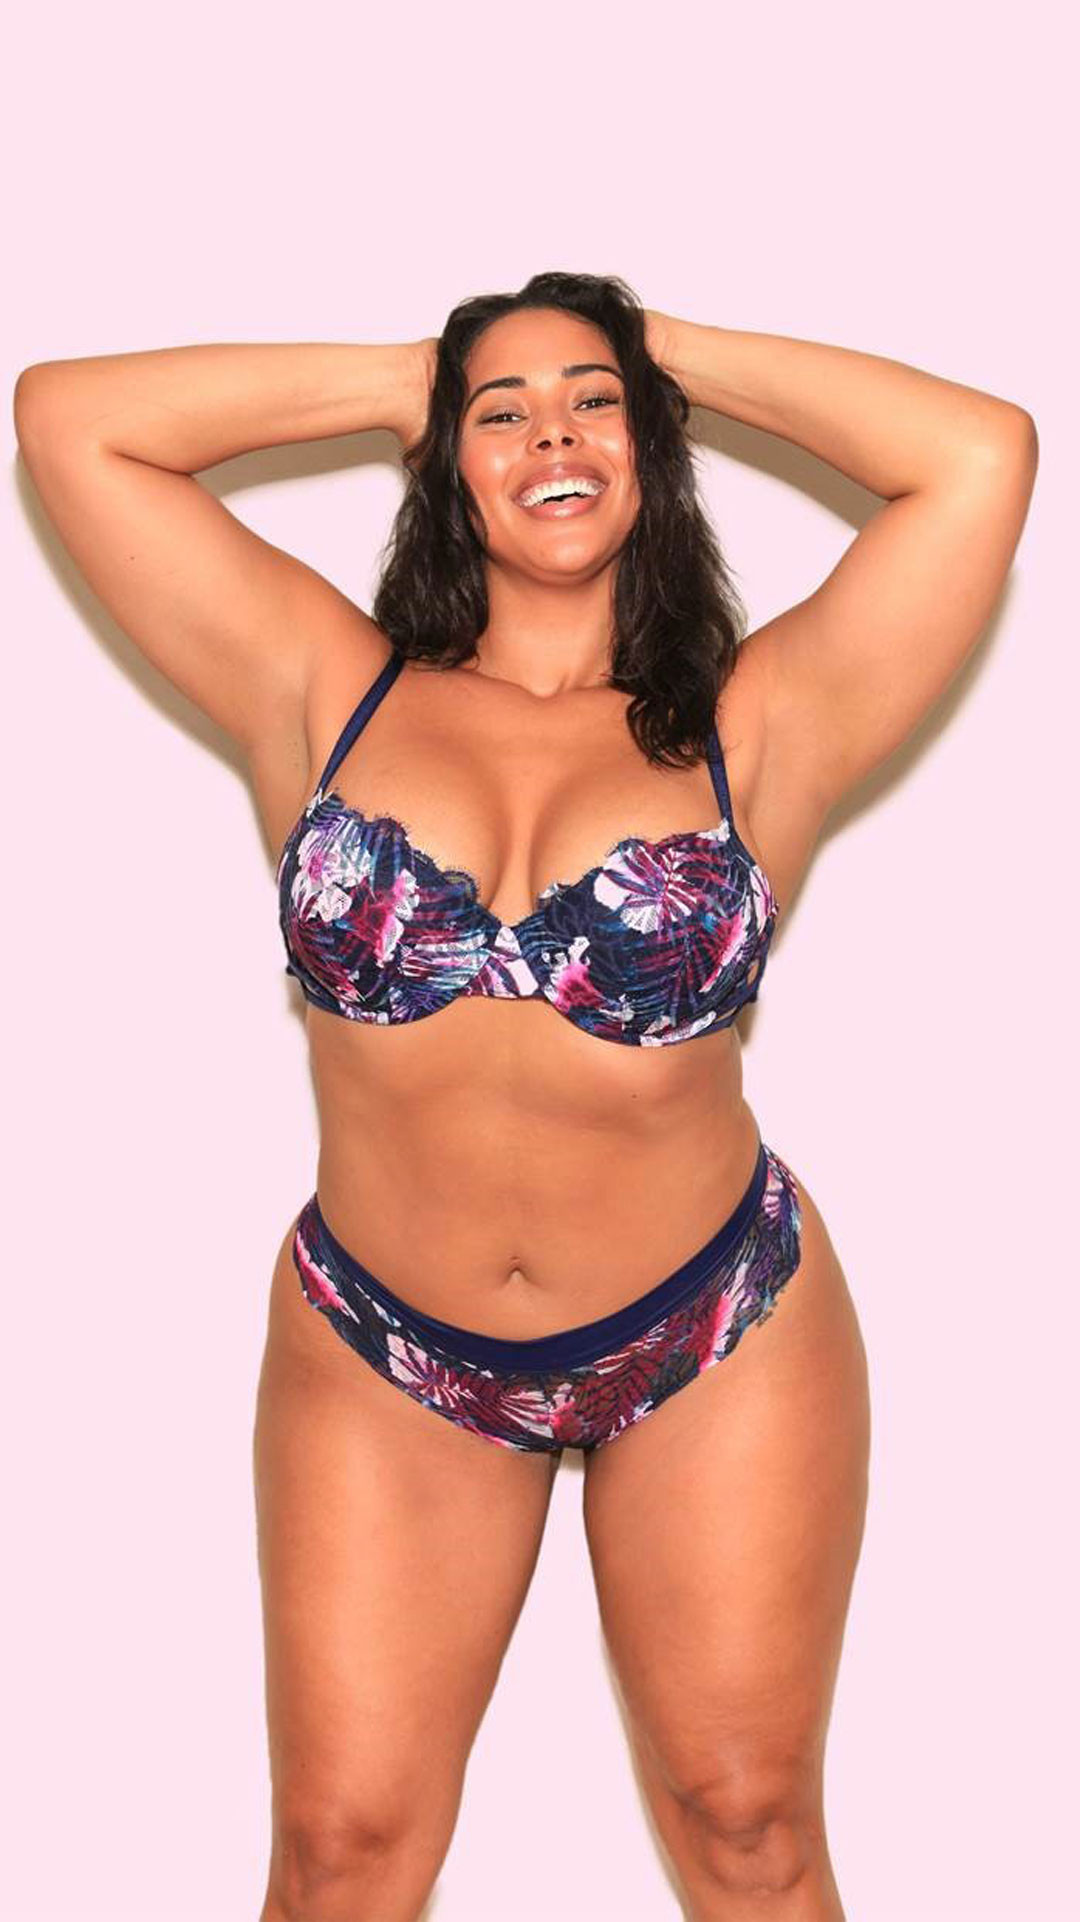 Curvy girls can sell lingerie too: plus-size model recreates Victoria's  Secret ads